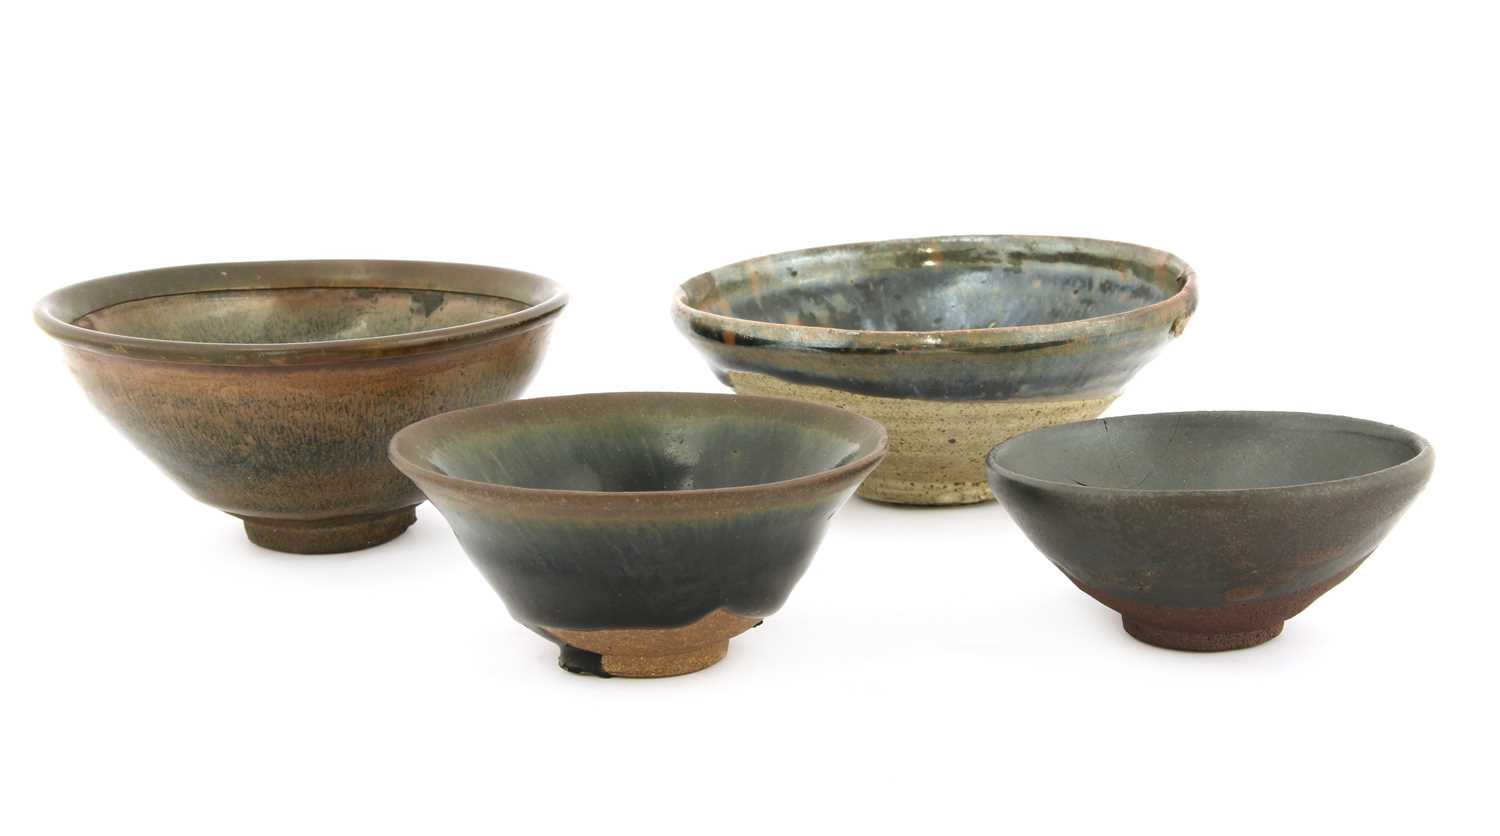 Lot 85 - A collection of three Chinese Jian ware tea bowls